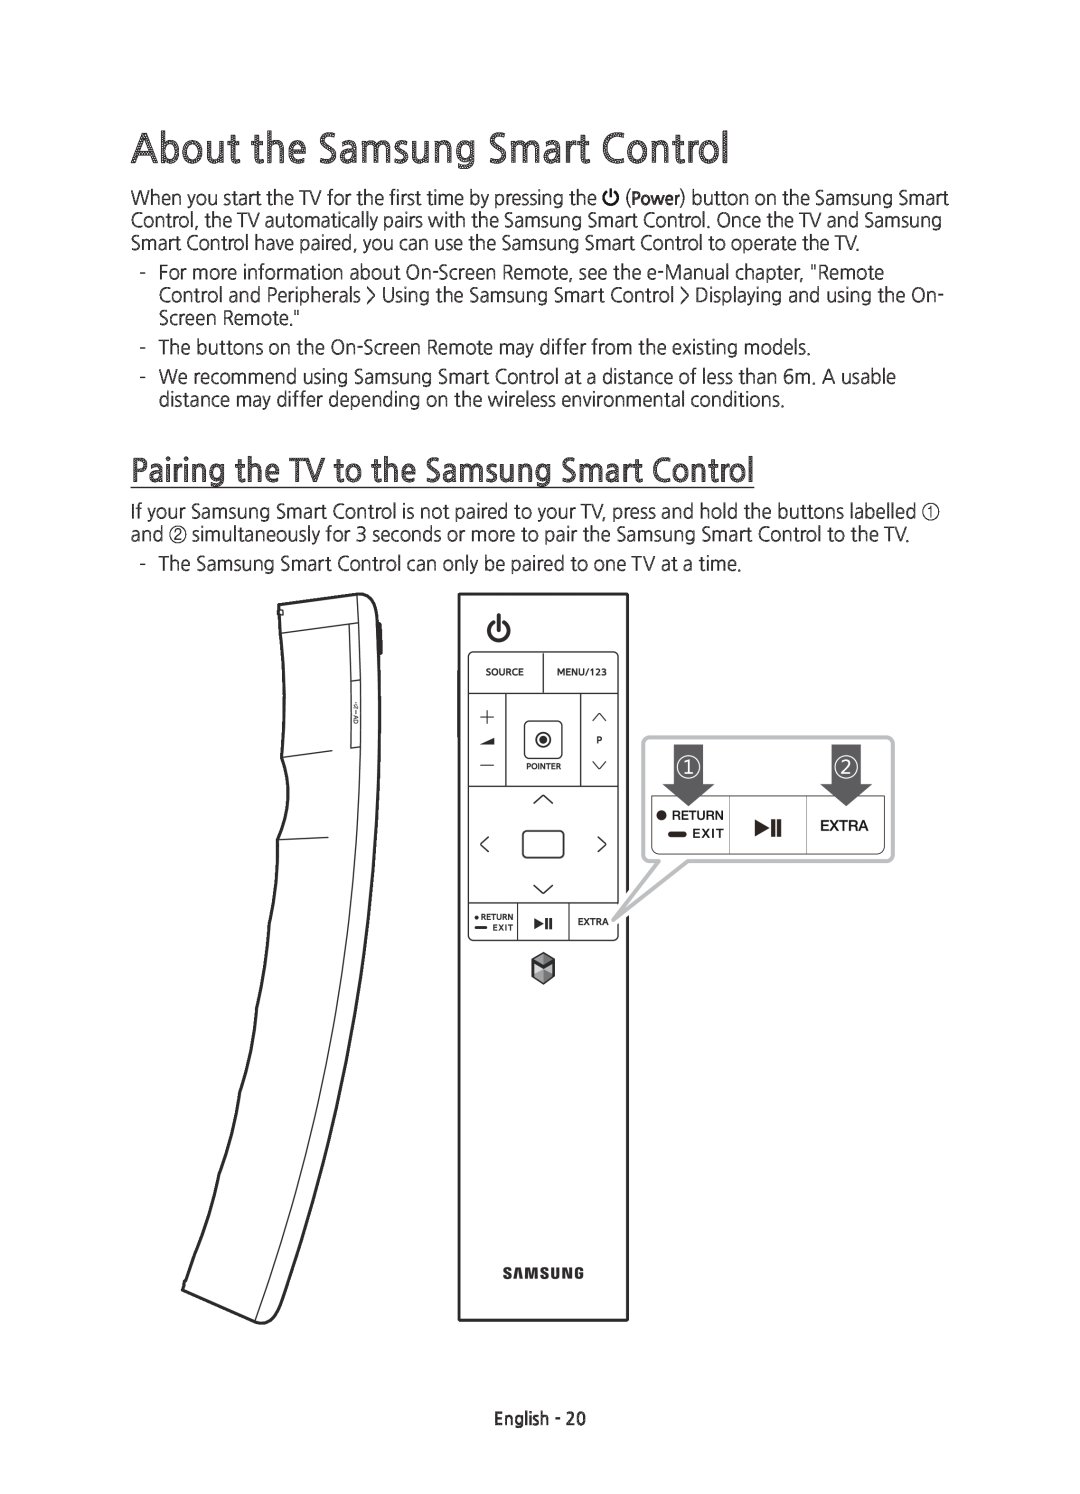 Samsung UE55JS8500TXZT, UE48JS8500TXXC manual About the Samsung Smart Control, Pairing the TV to the Samsung Smart Control 